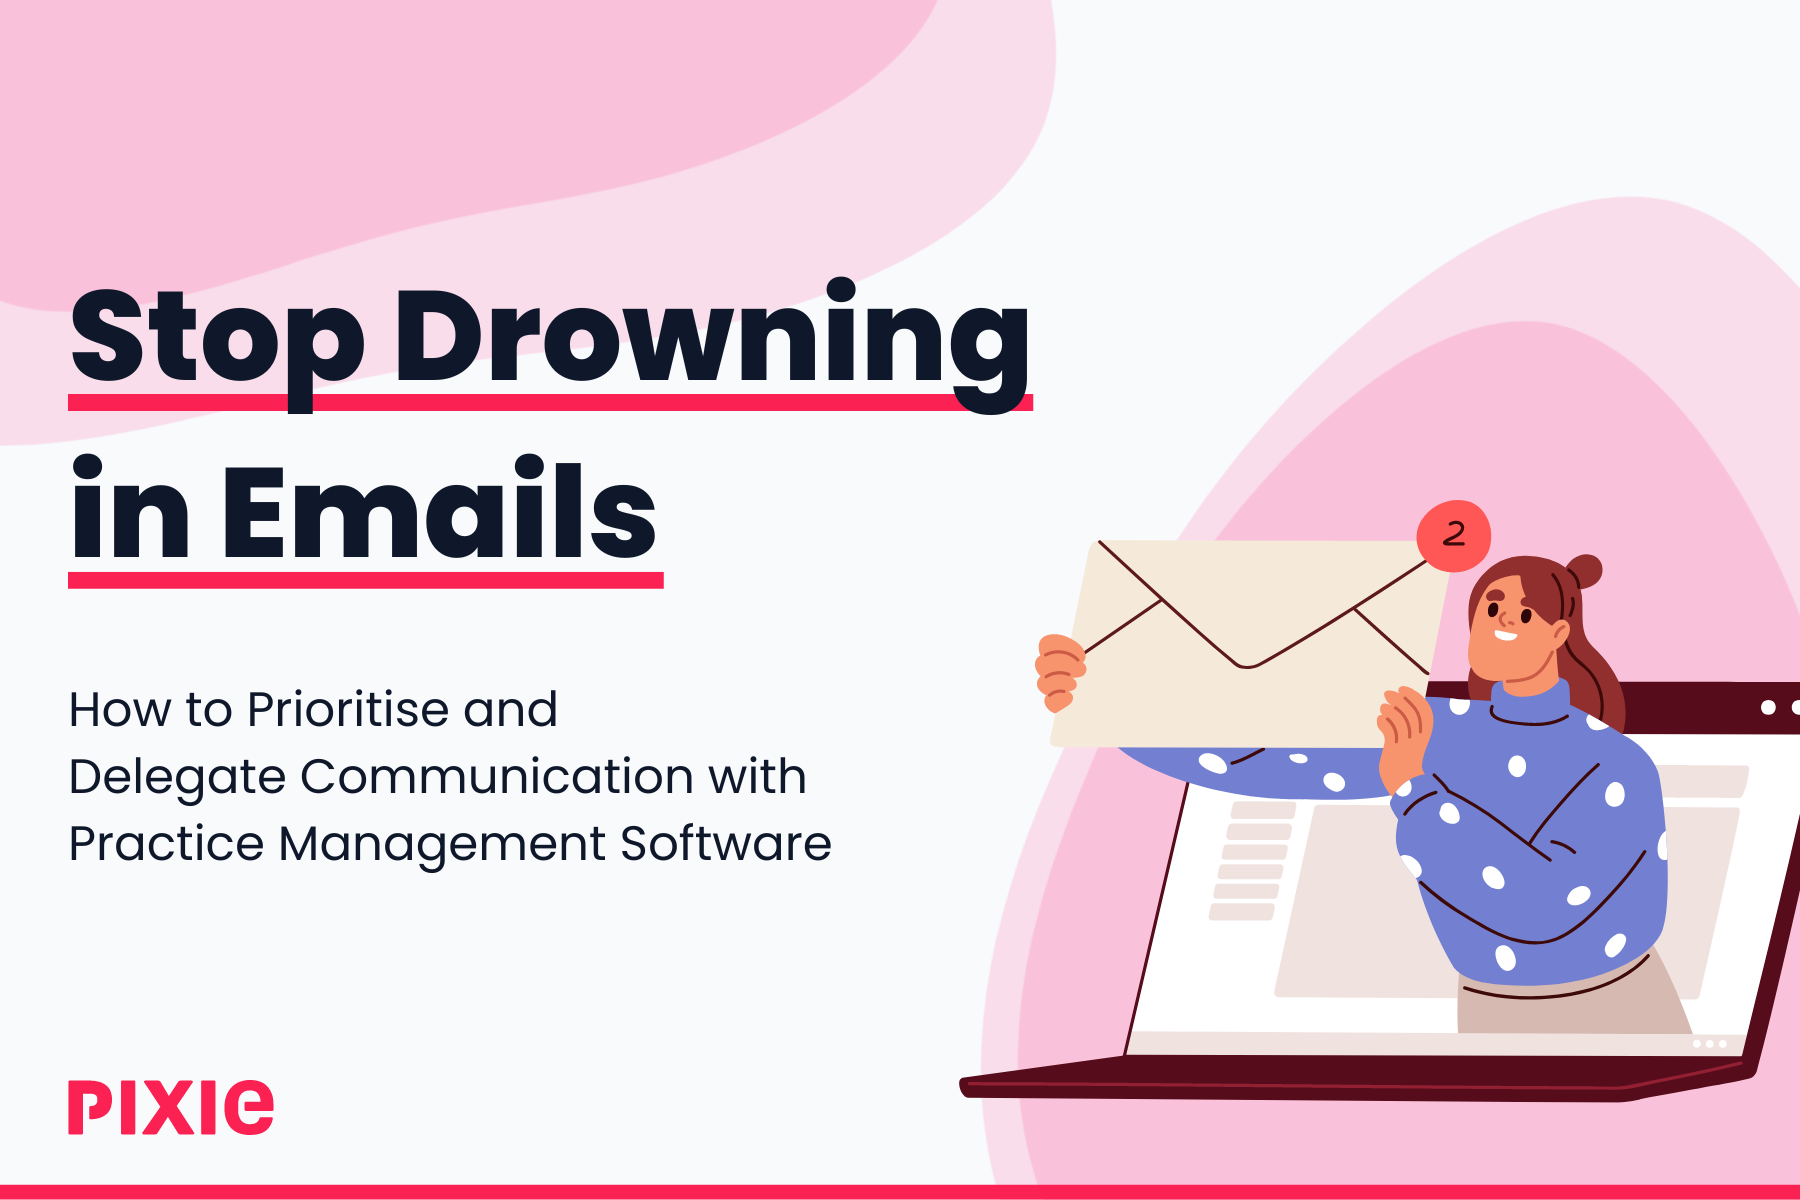 Stop Drowning in Emails: How to Prioritise and Delegate Communication with Practice Management Software by Pixie image